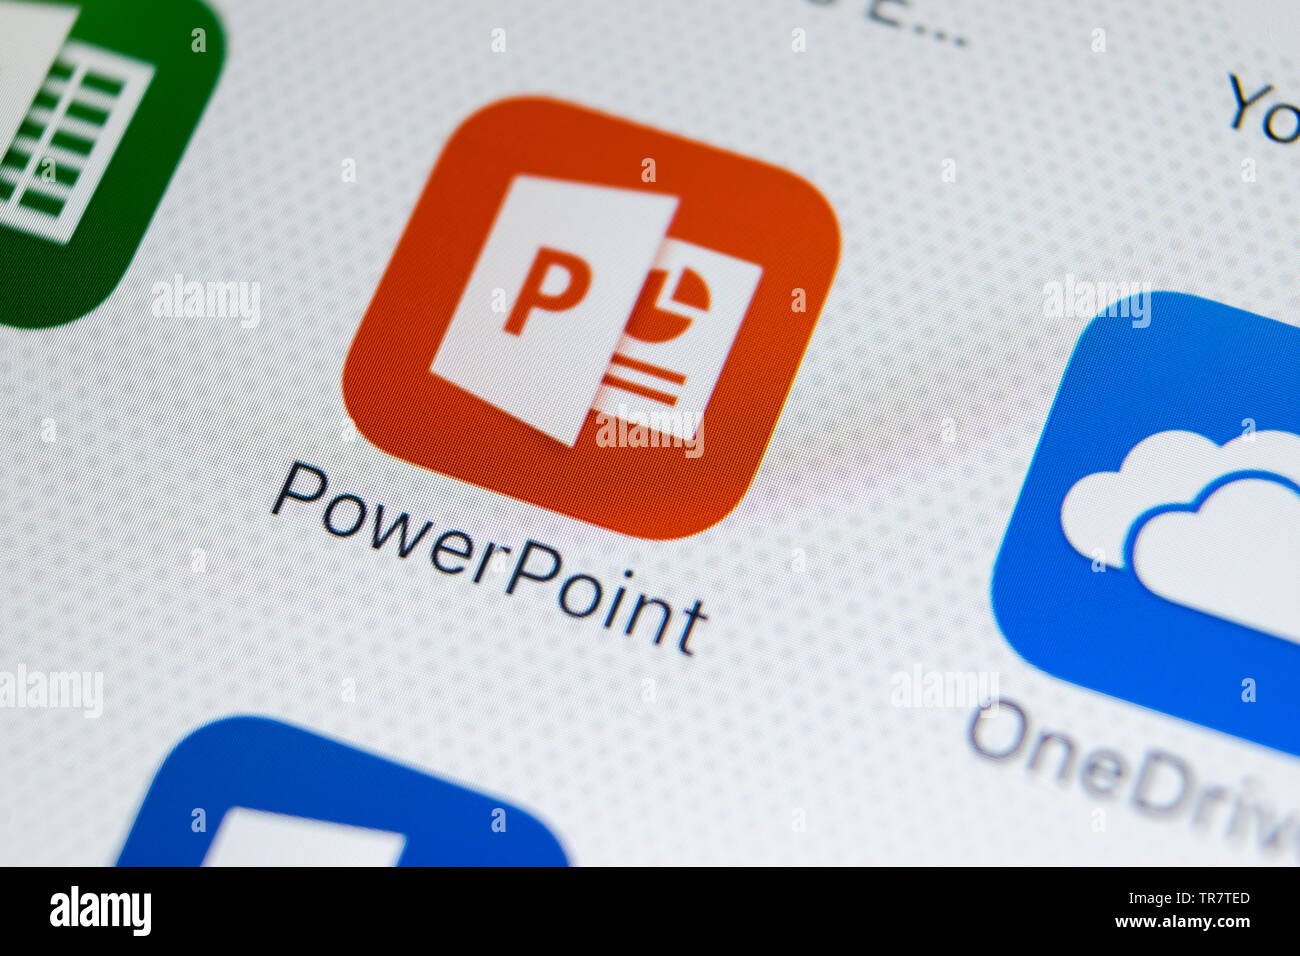 Sankt-Petersburg, Russia, February 28, 2018: Microsoft Powerpoint application icon on Apple iPhone X screen close-up. PowerPoint app icon. Microsoft P Stock Photo